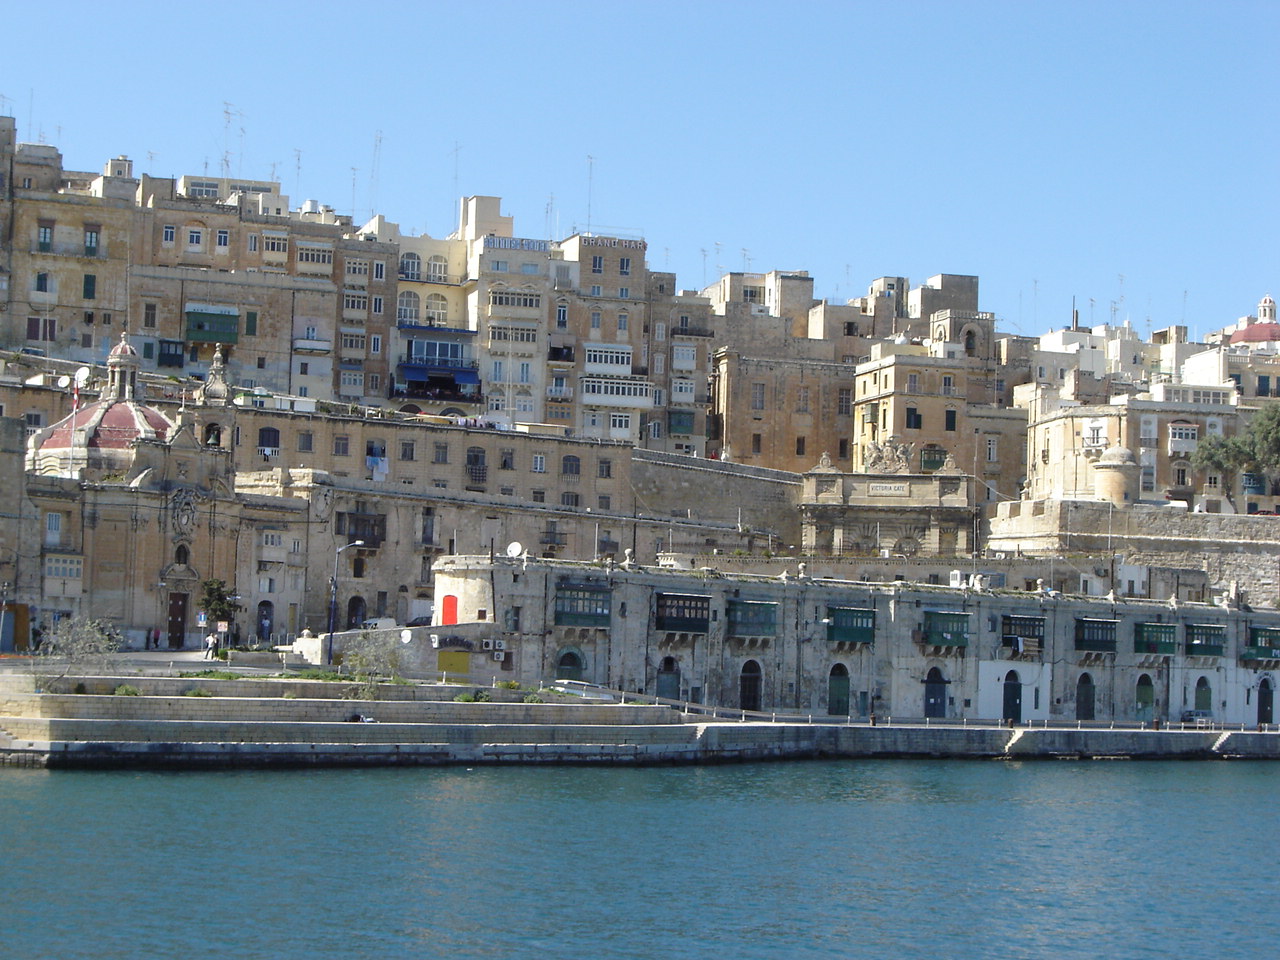 Malta experts using nuclear technique to preserve cultural heritage